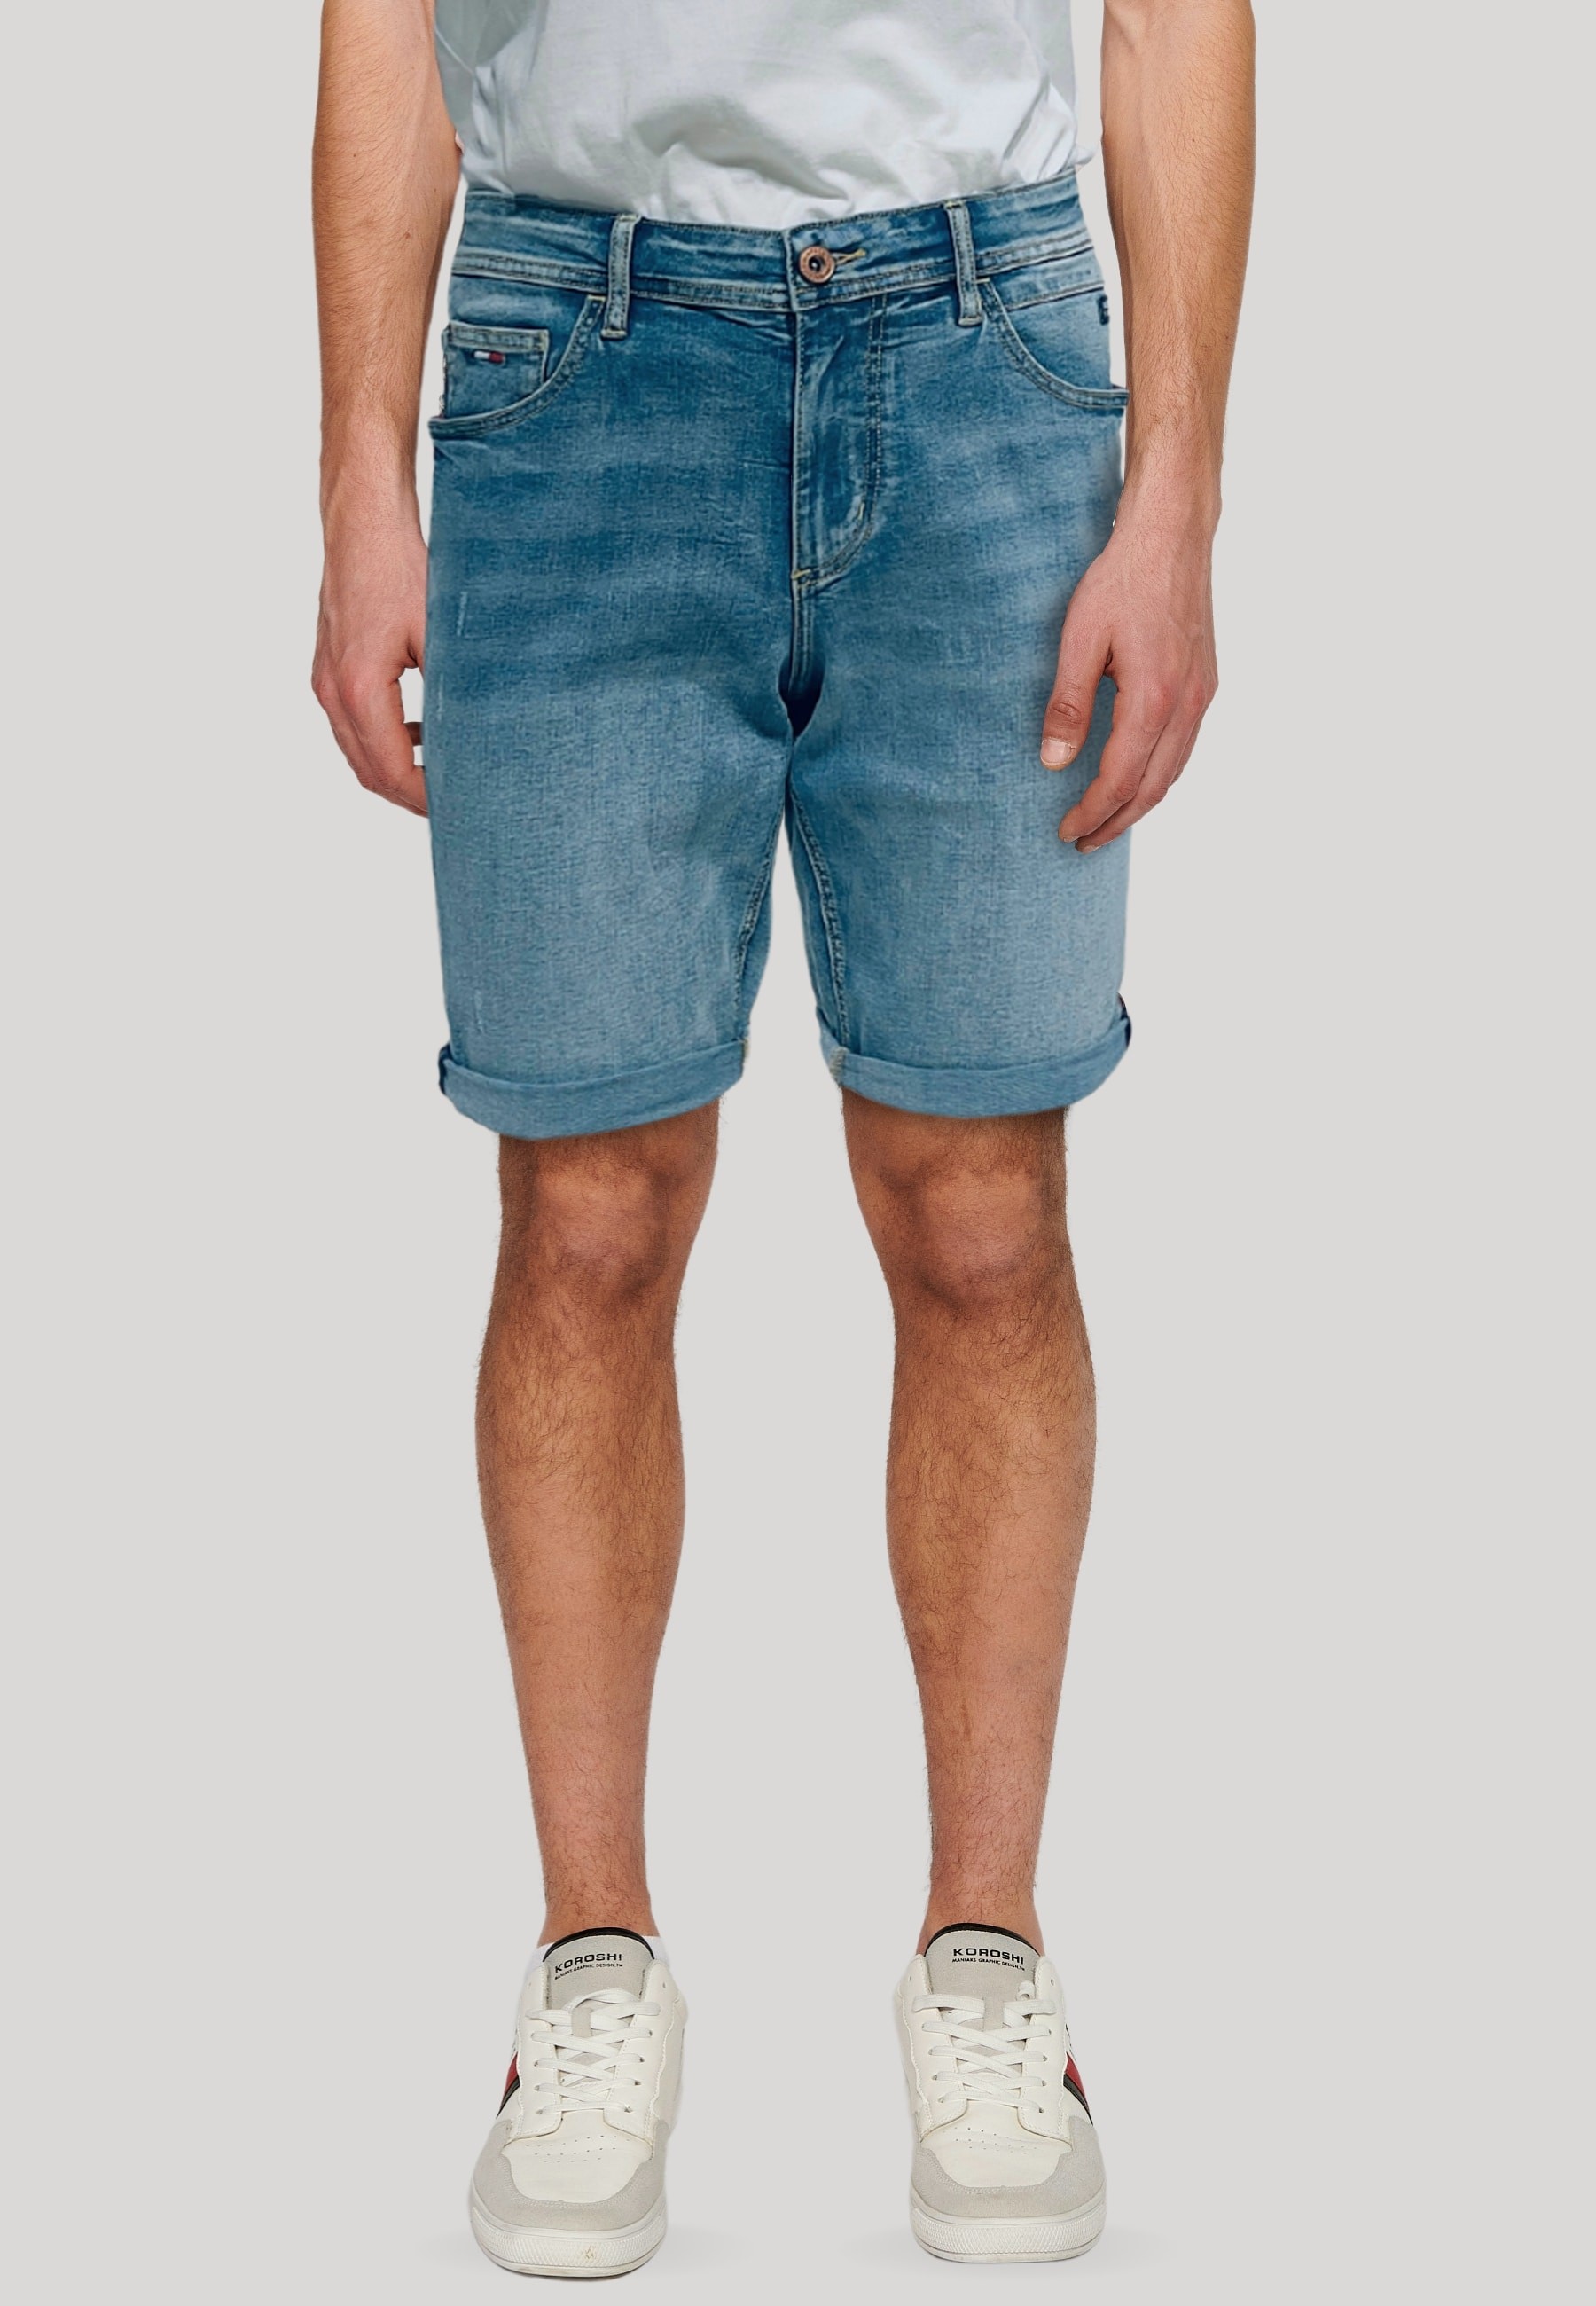 Denim Bermuda shorts with turn-up finish and front zipper and button closure with five pockets, one pocket pocket, in Blue for Men 3